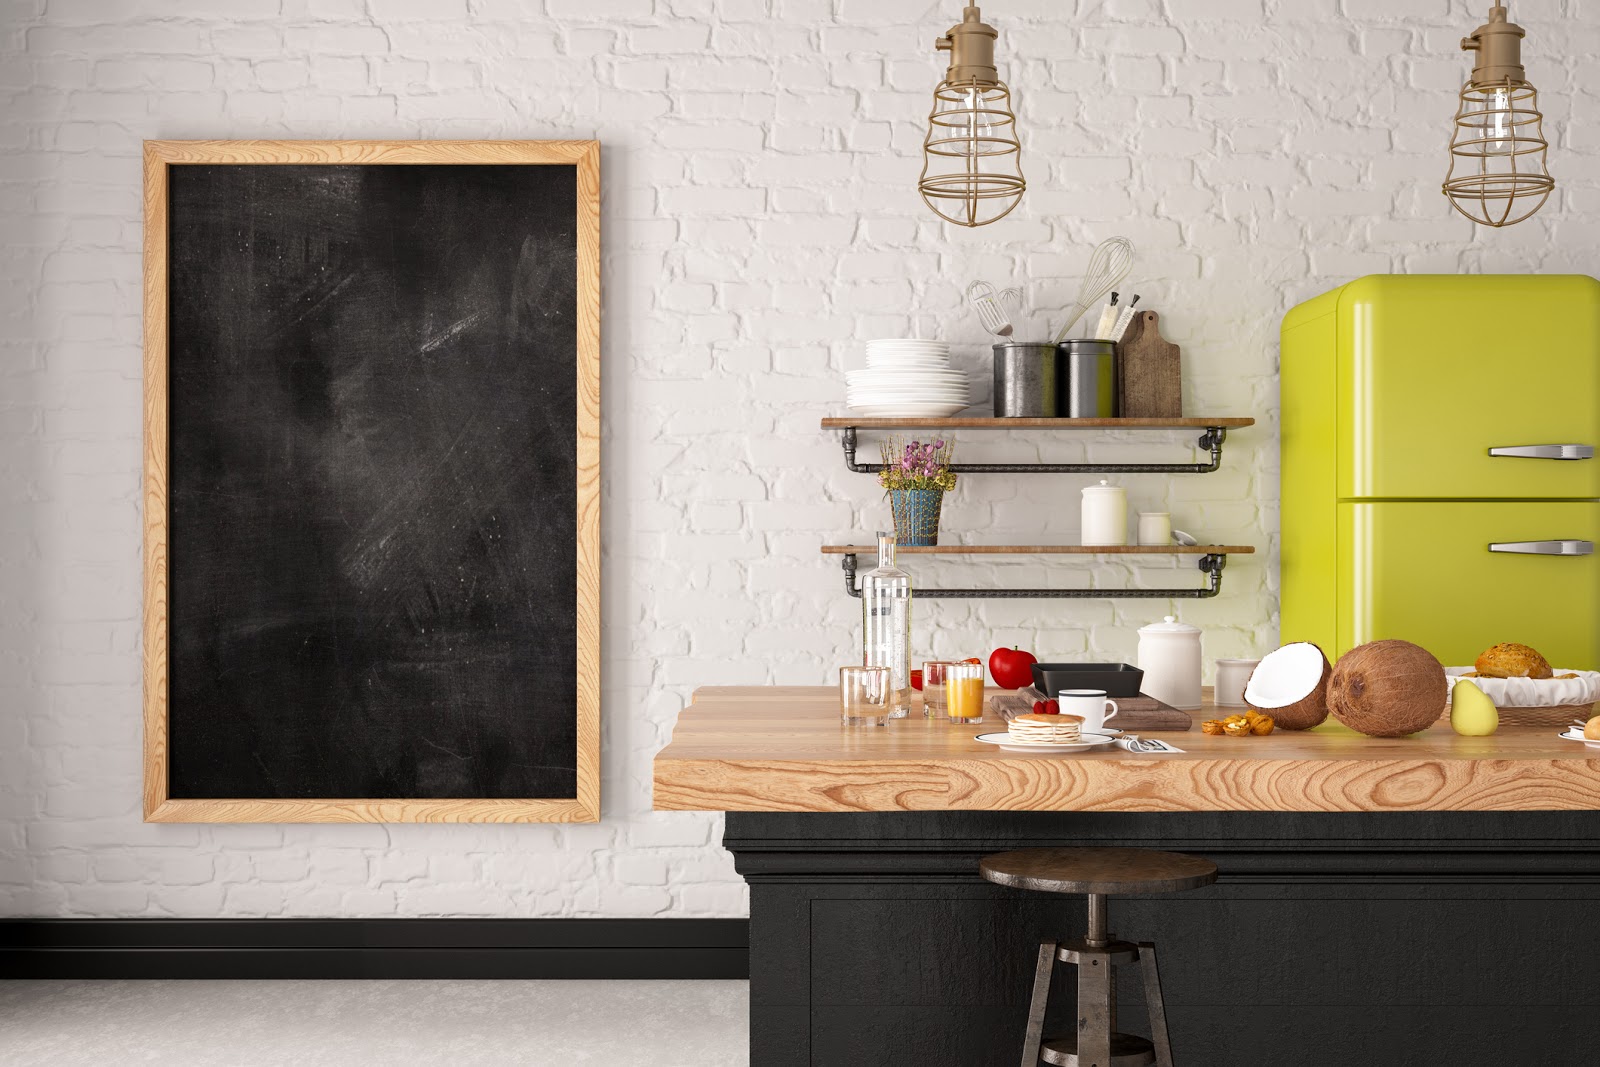 Magnetic Chalkboard Paint: What You Need To Know